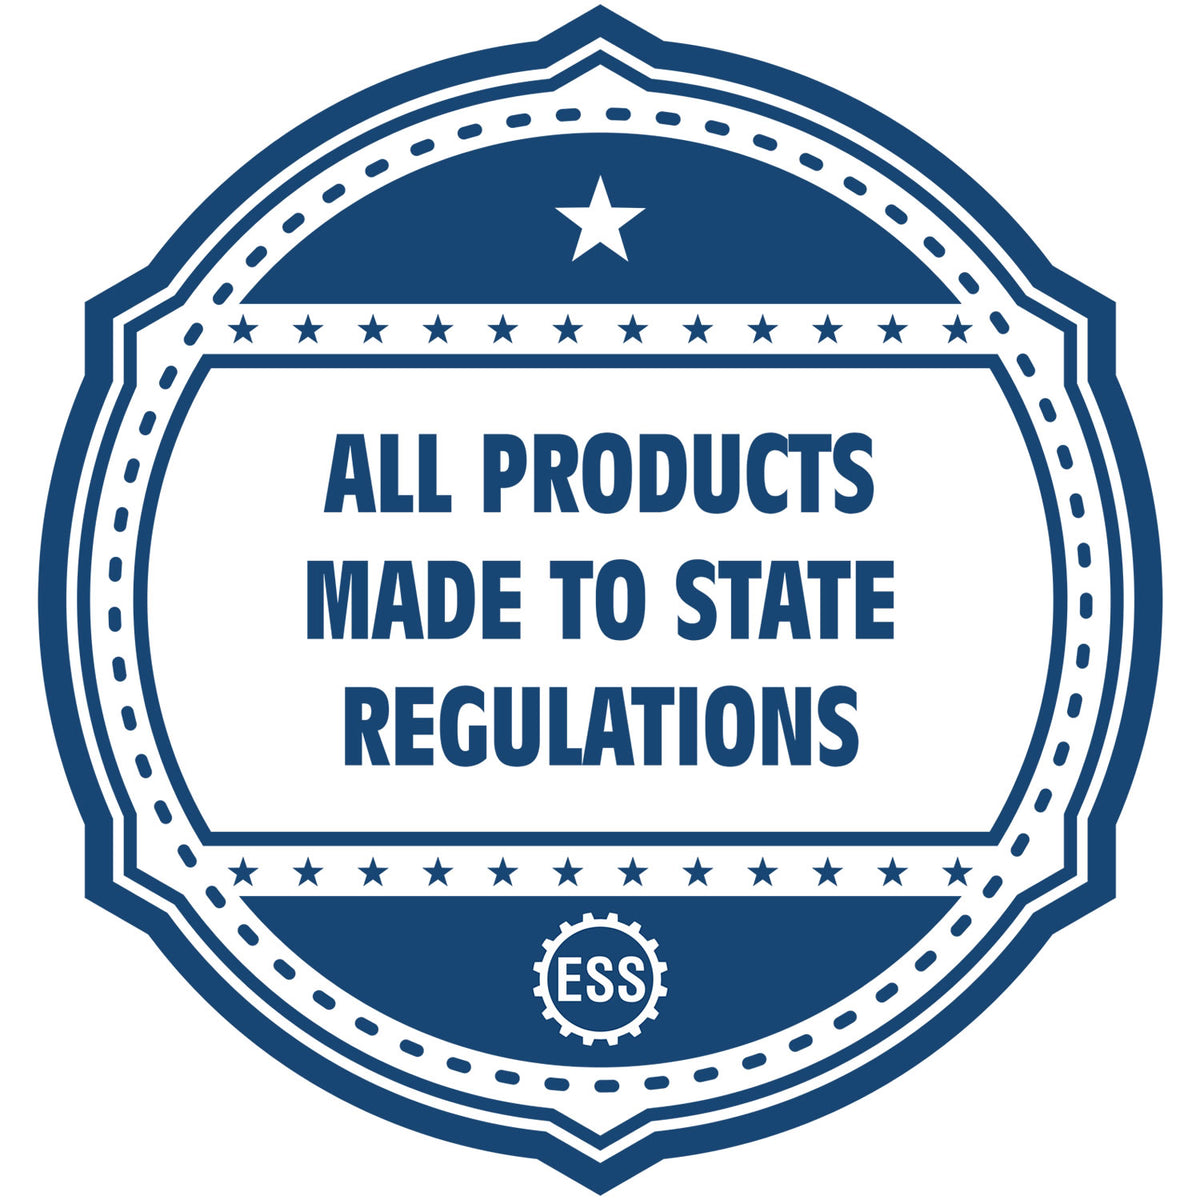 An icon or badge element for the Self-Inking Arkansas PE Stamp showing that this product is made in compliance with state regulations.